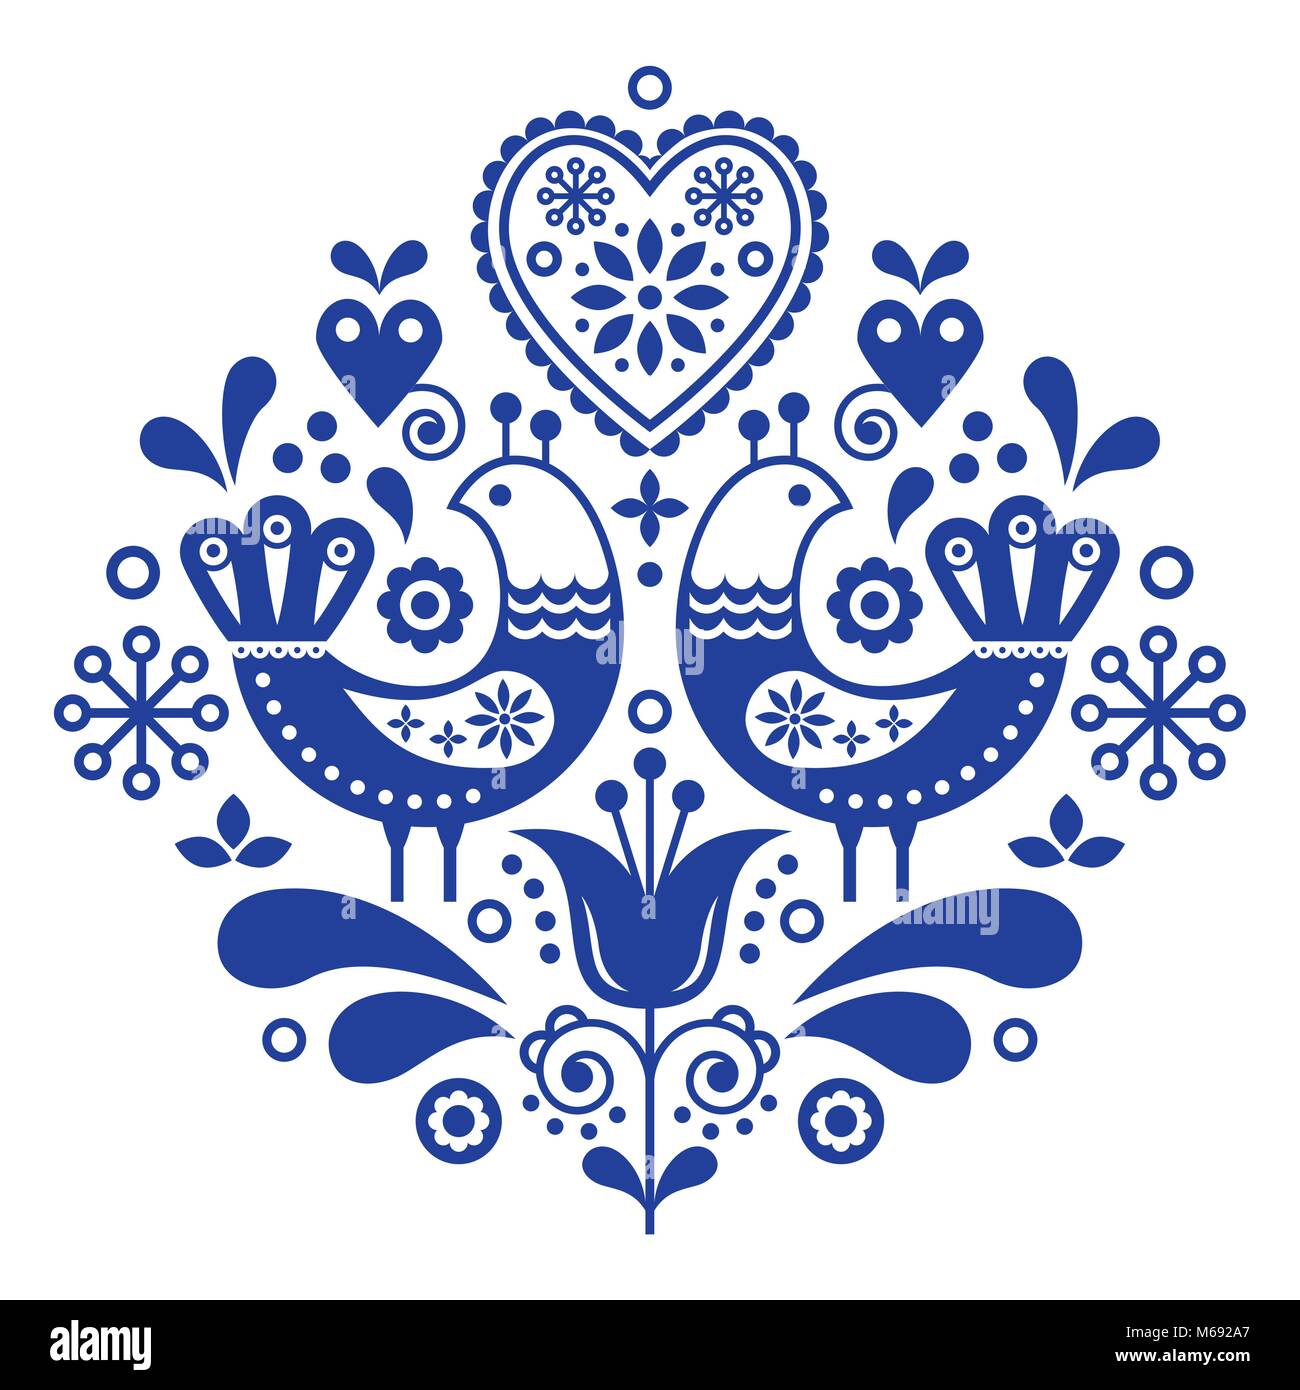 Scandinavian folk art pattern with birds and flowers, Nordic floral design, retro background in navy blue Stock Vector